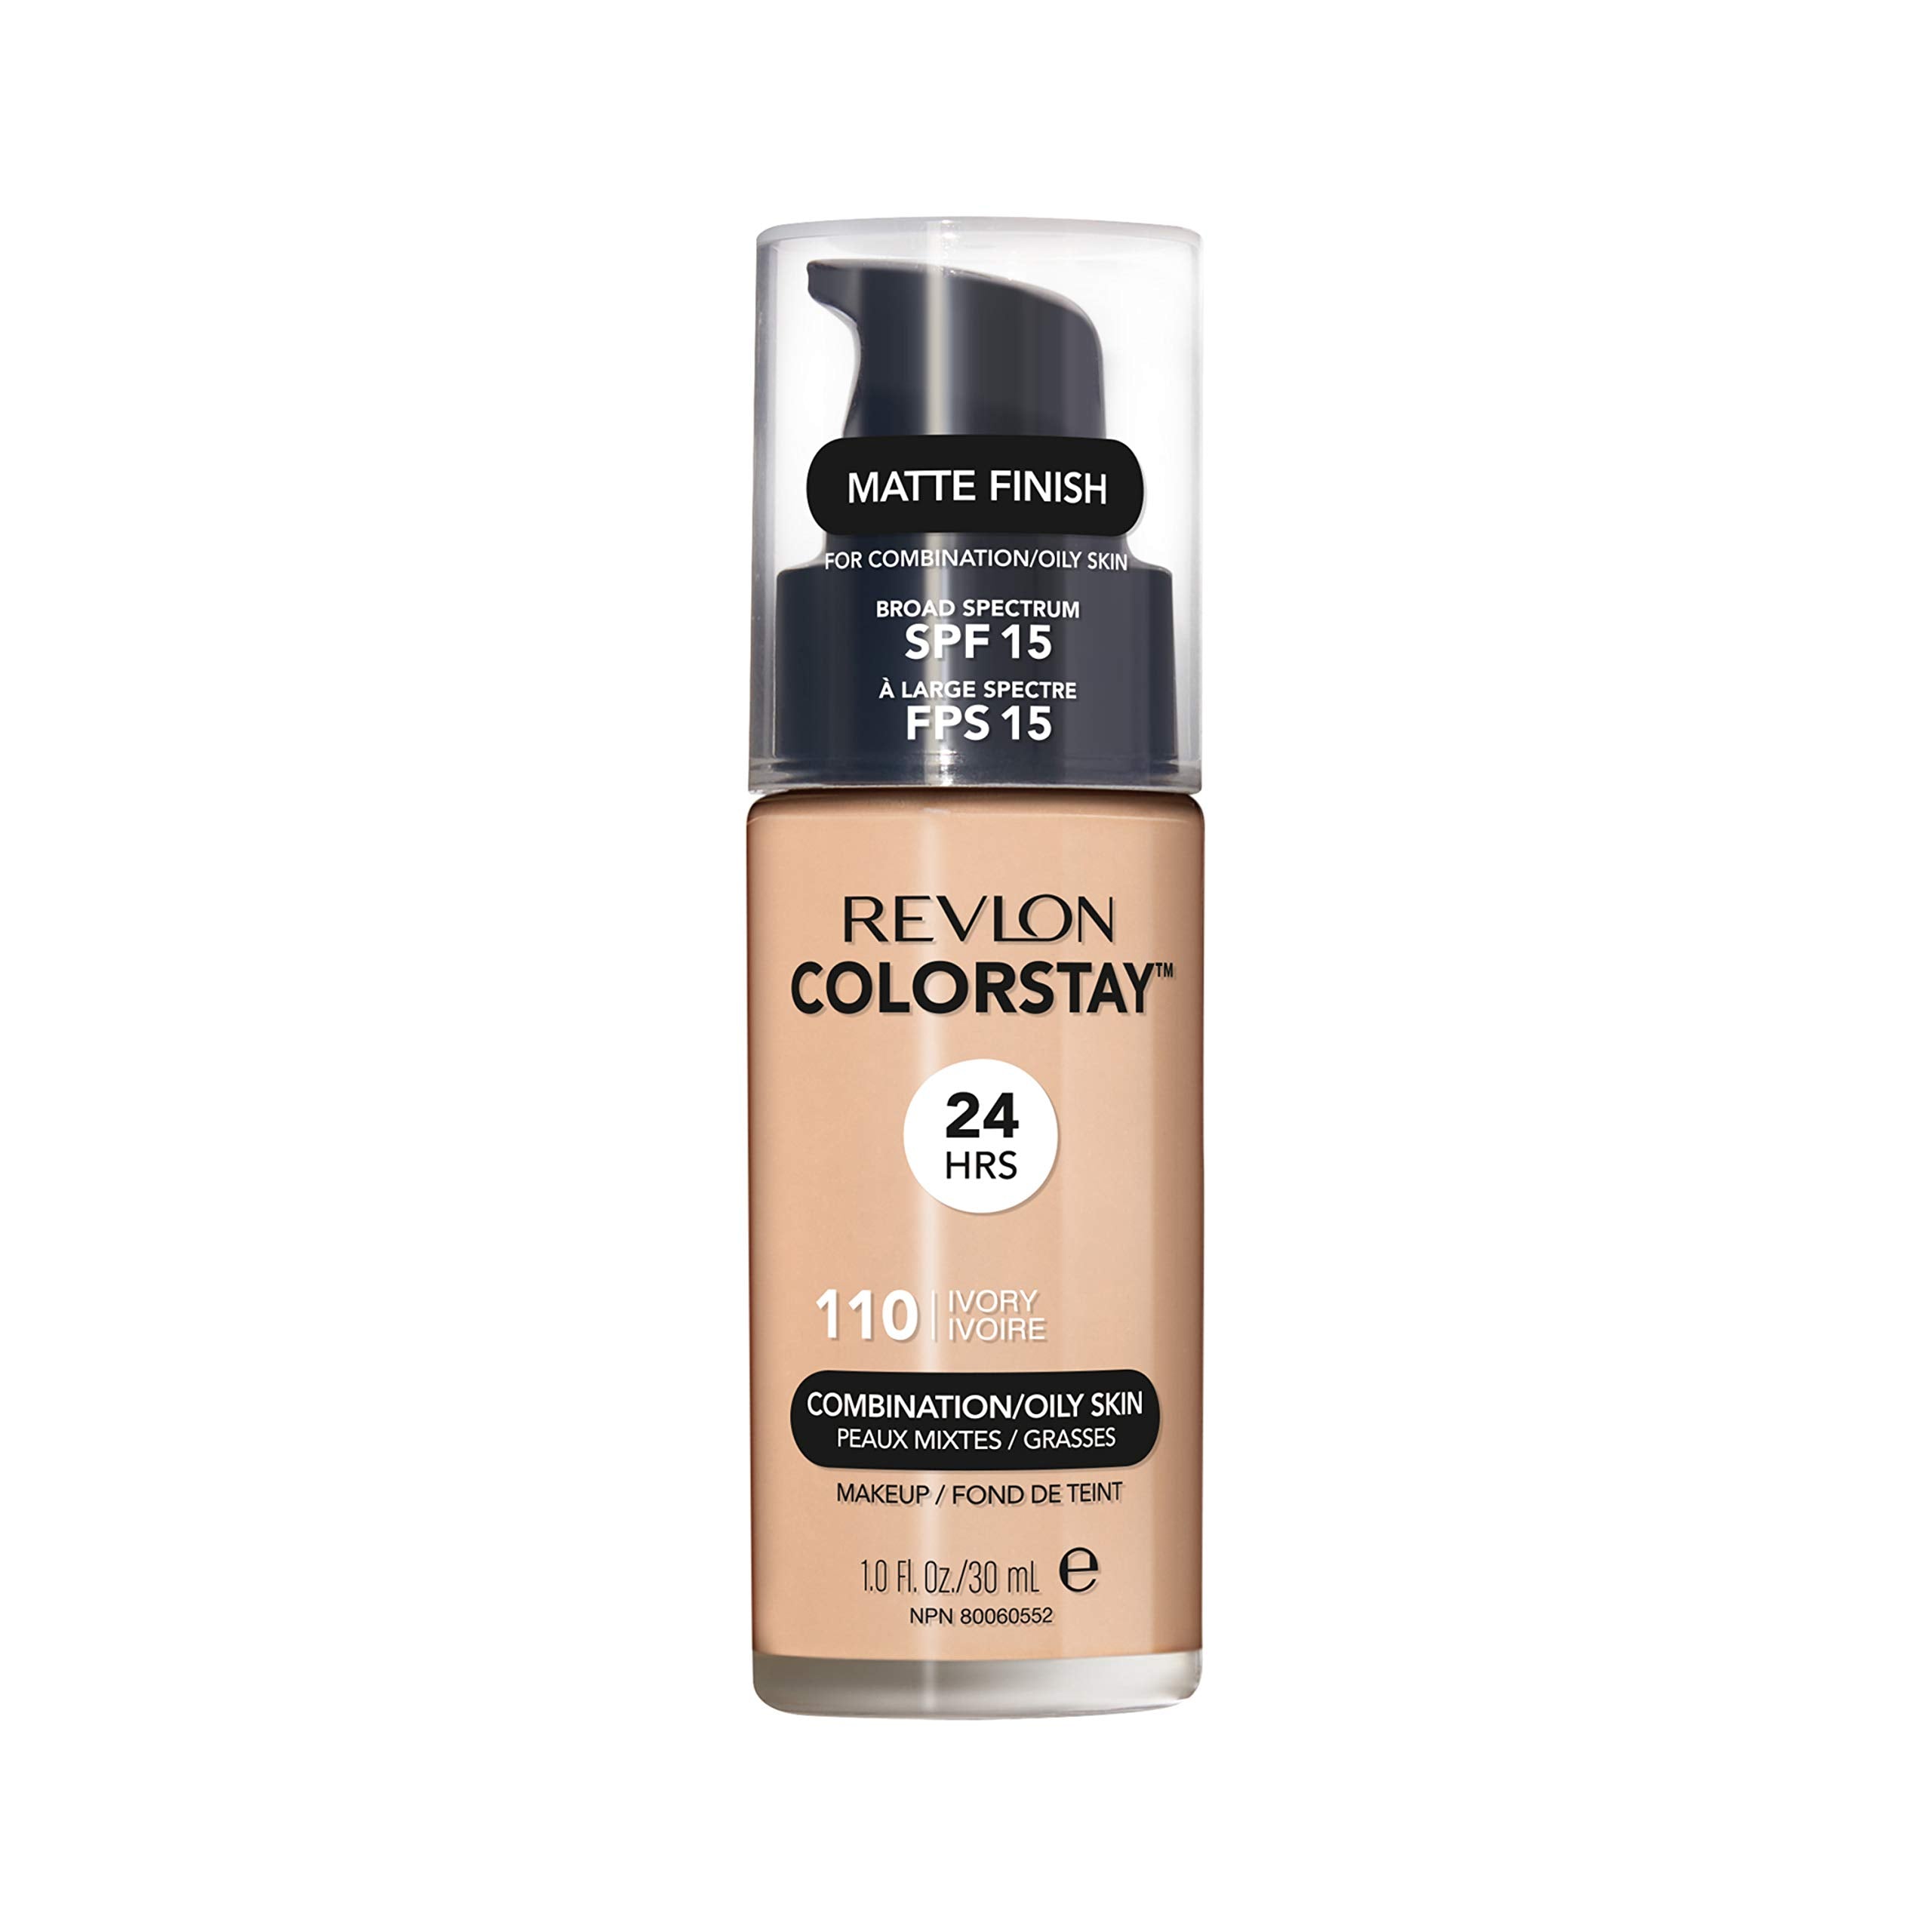 Revlon Colorstay Liquid Foundation Makeup for Combination/Oily Skin SPF 15, Longwear Medium-Full Coverage with Matte Finish, Ivory (110), 30 ml